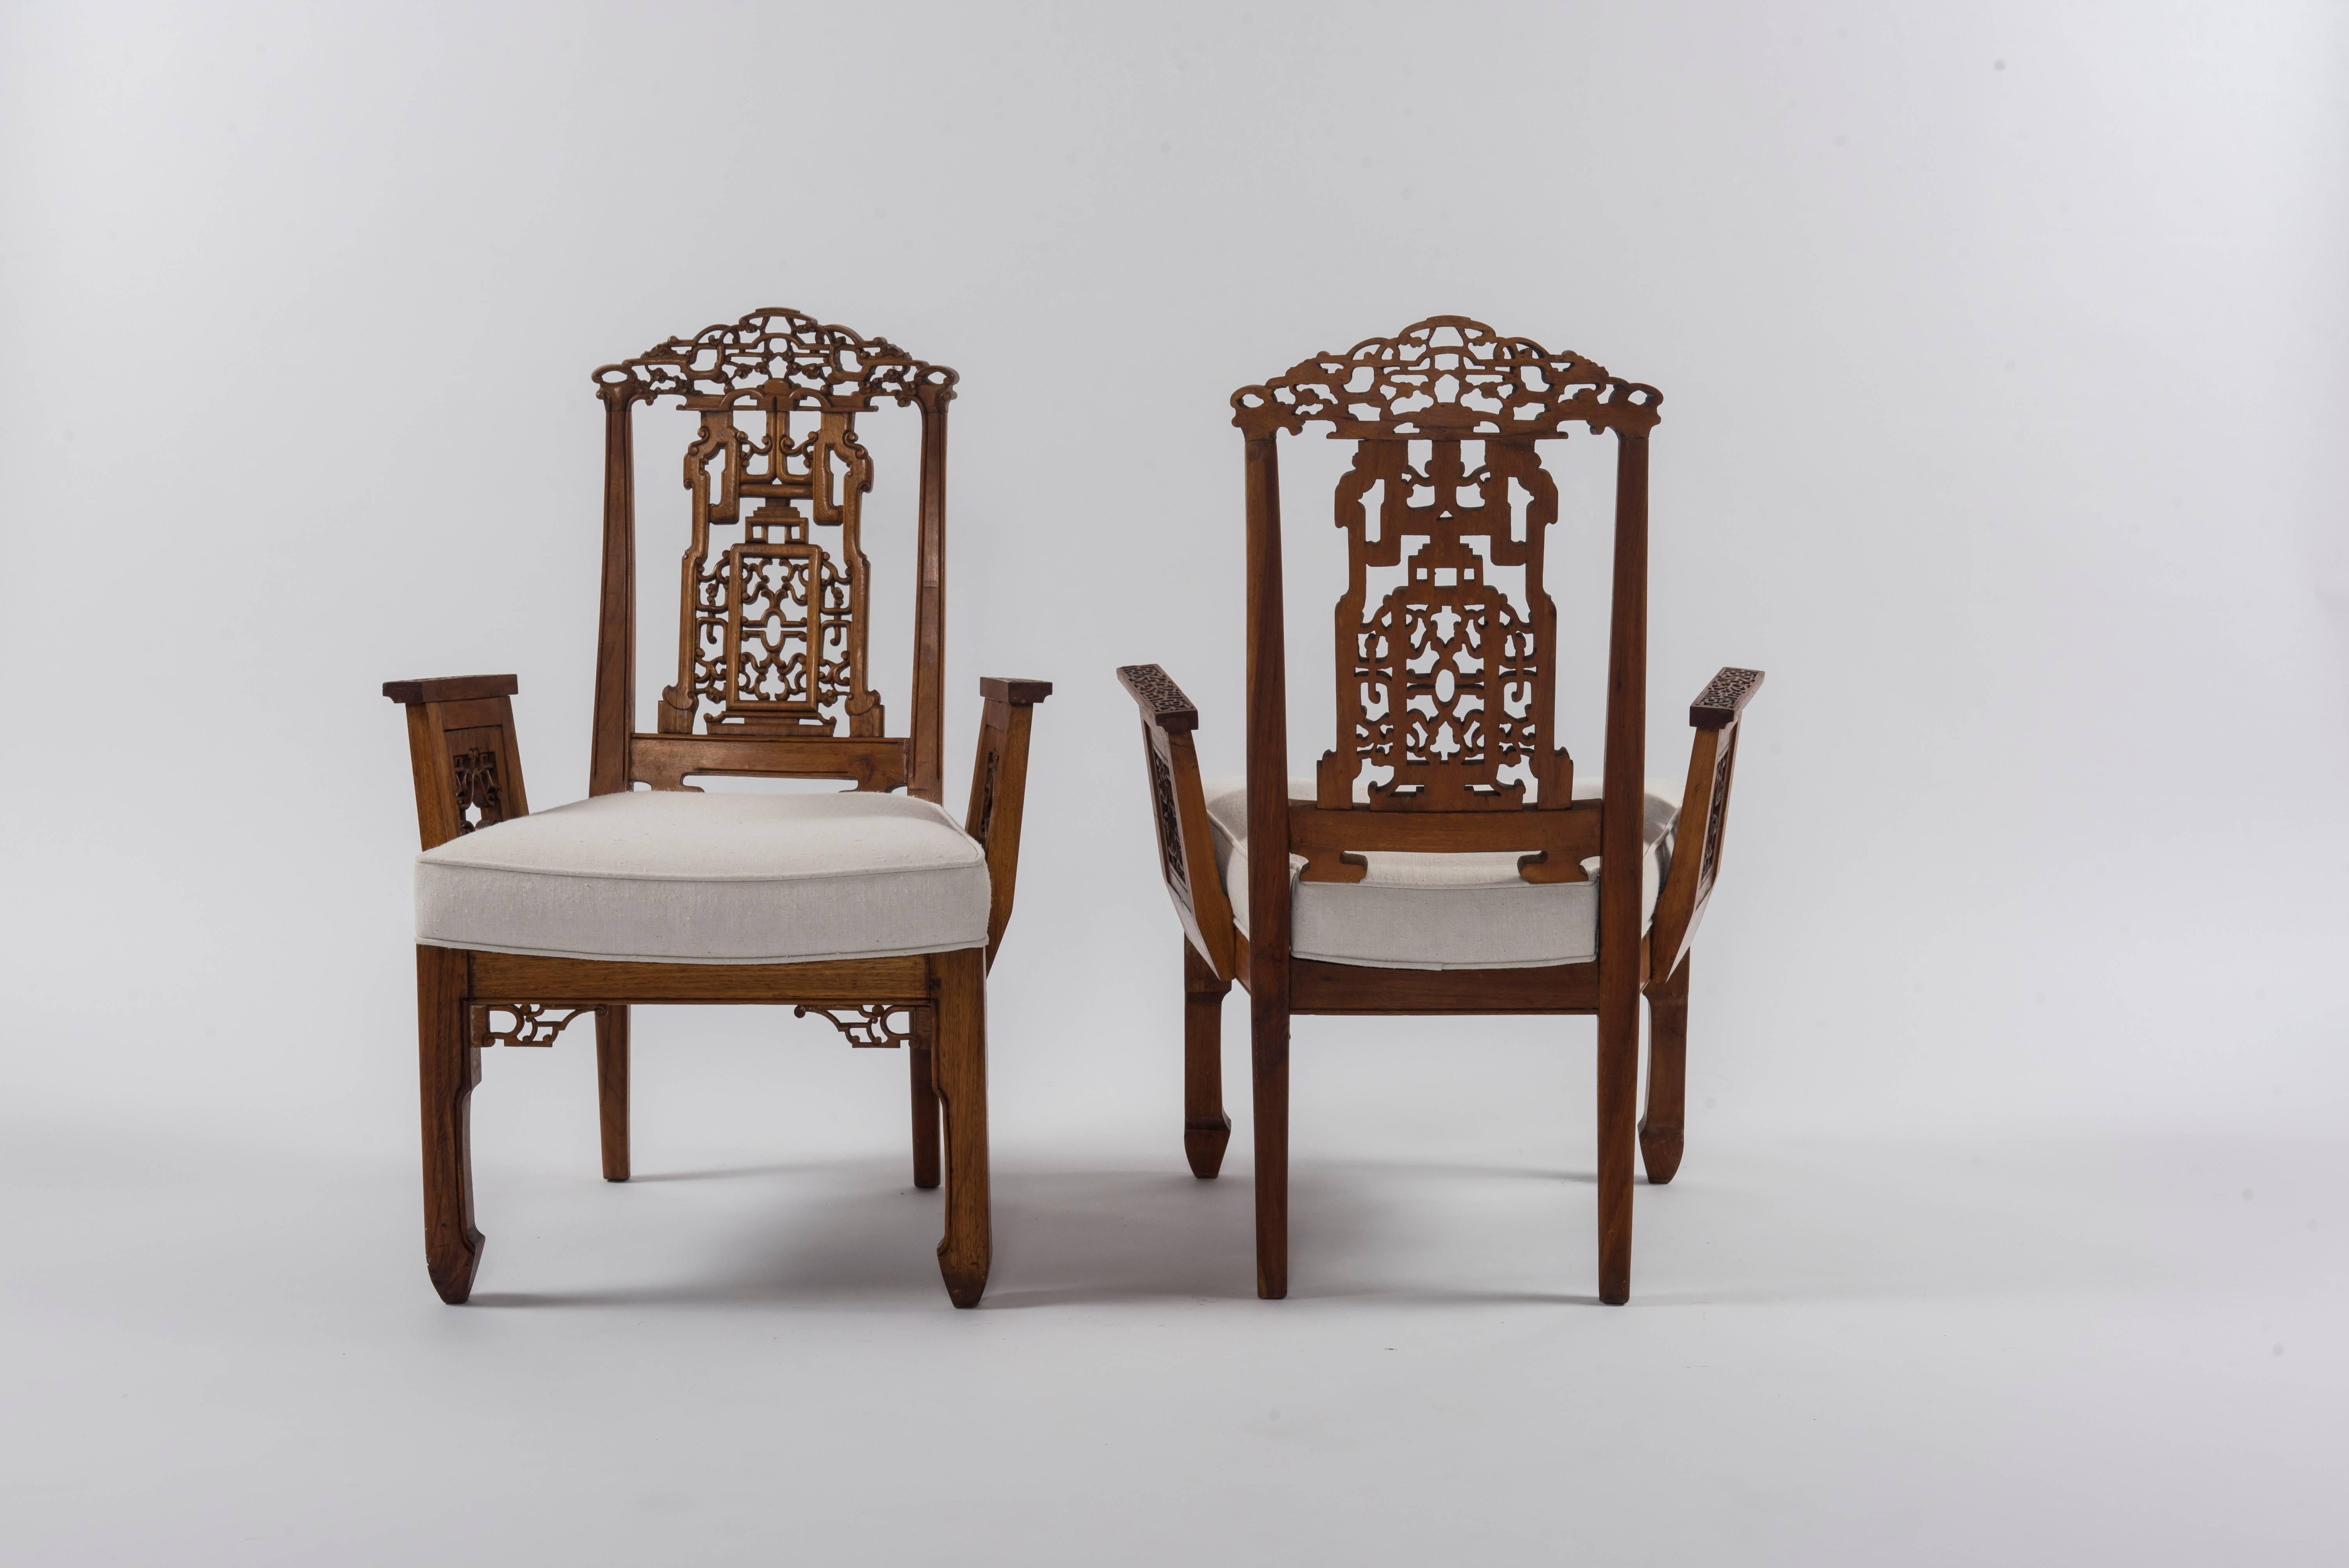 Hand-Carved Diminutive Pair of Carved Chinese Armchairs